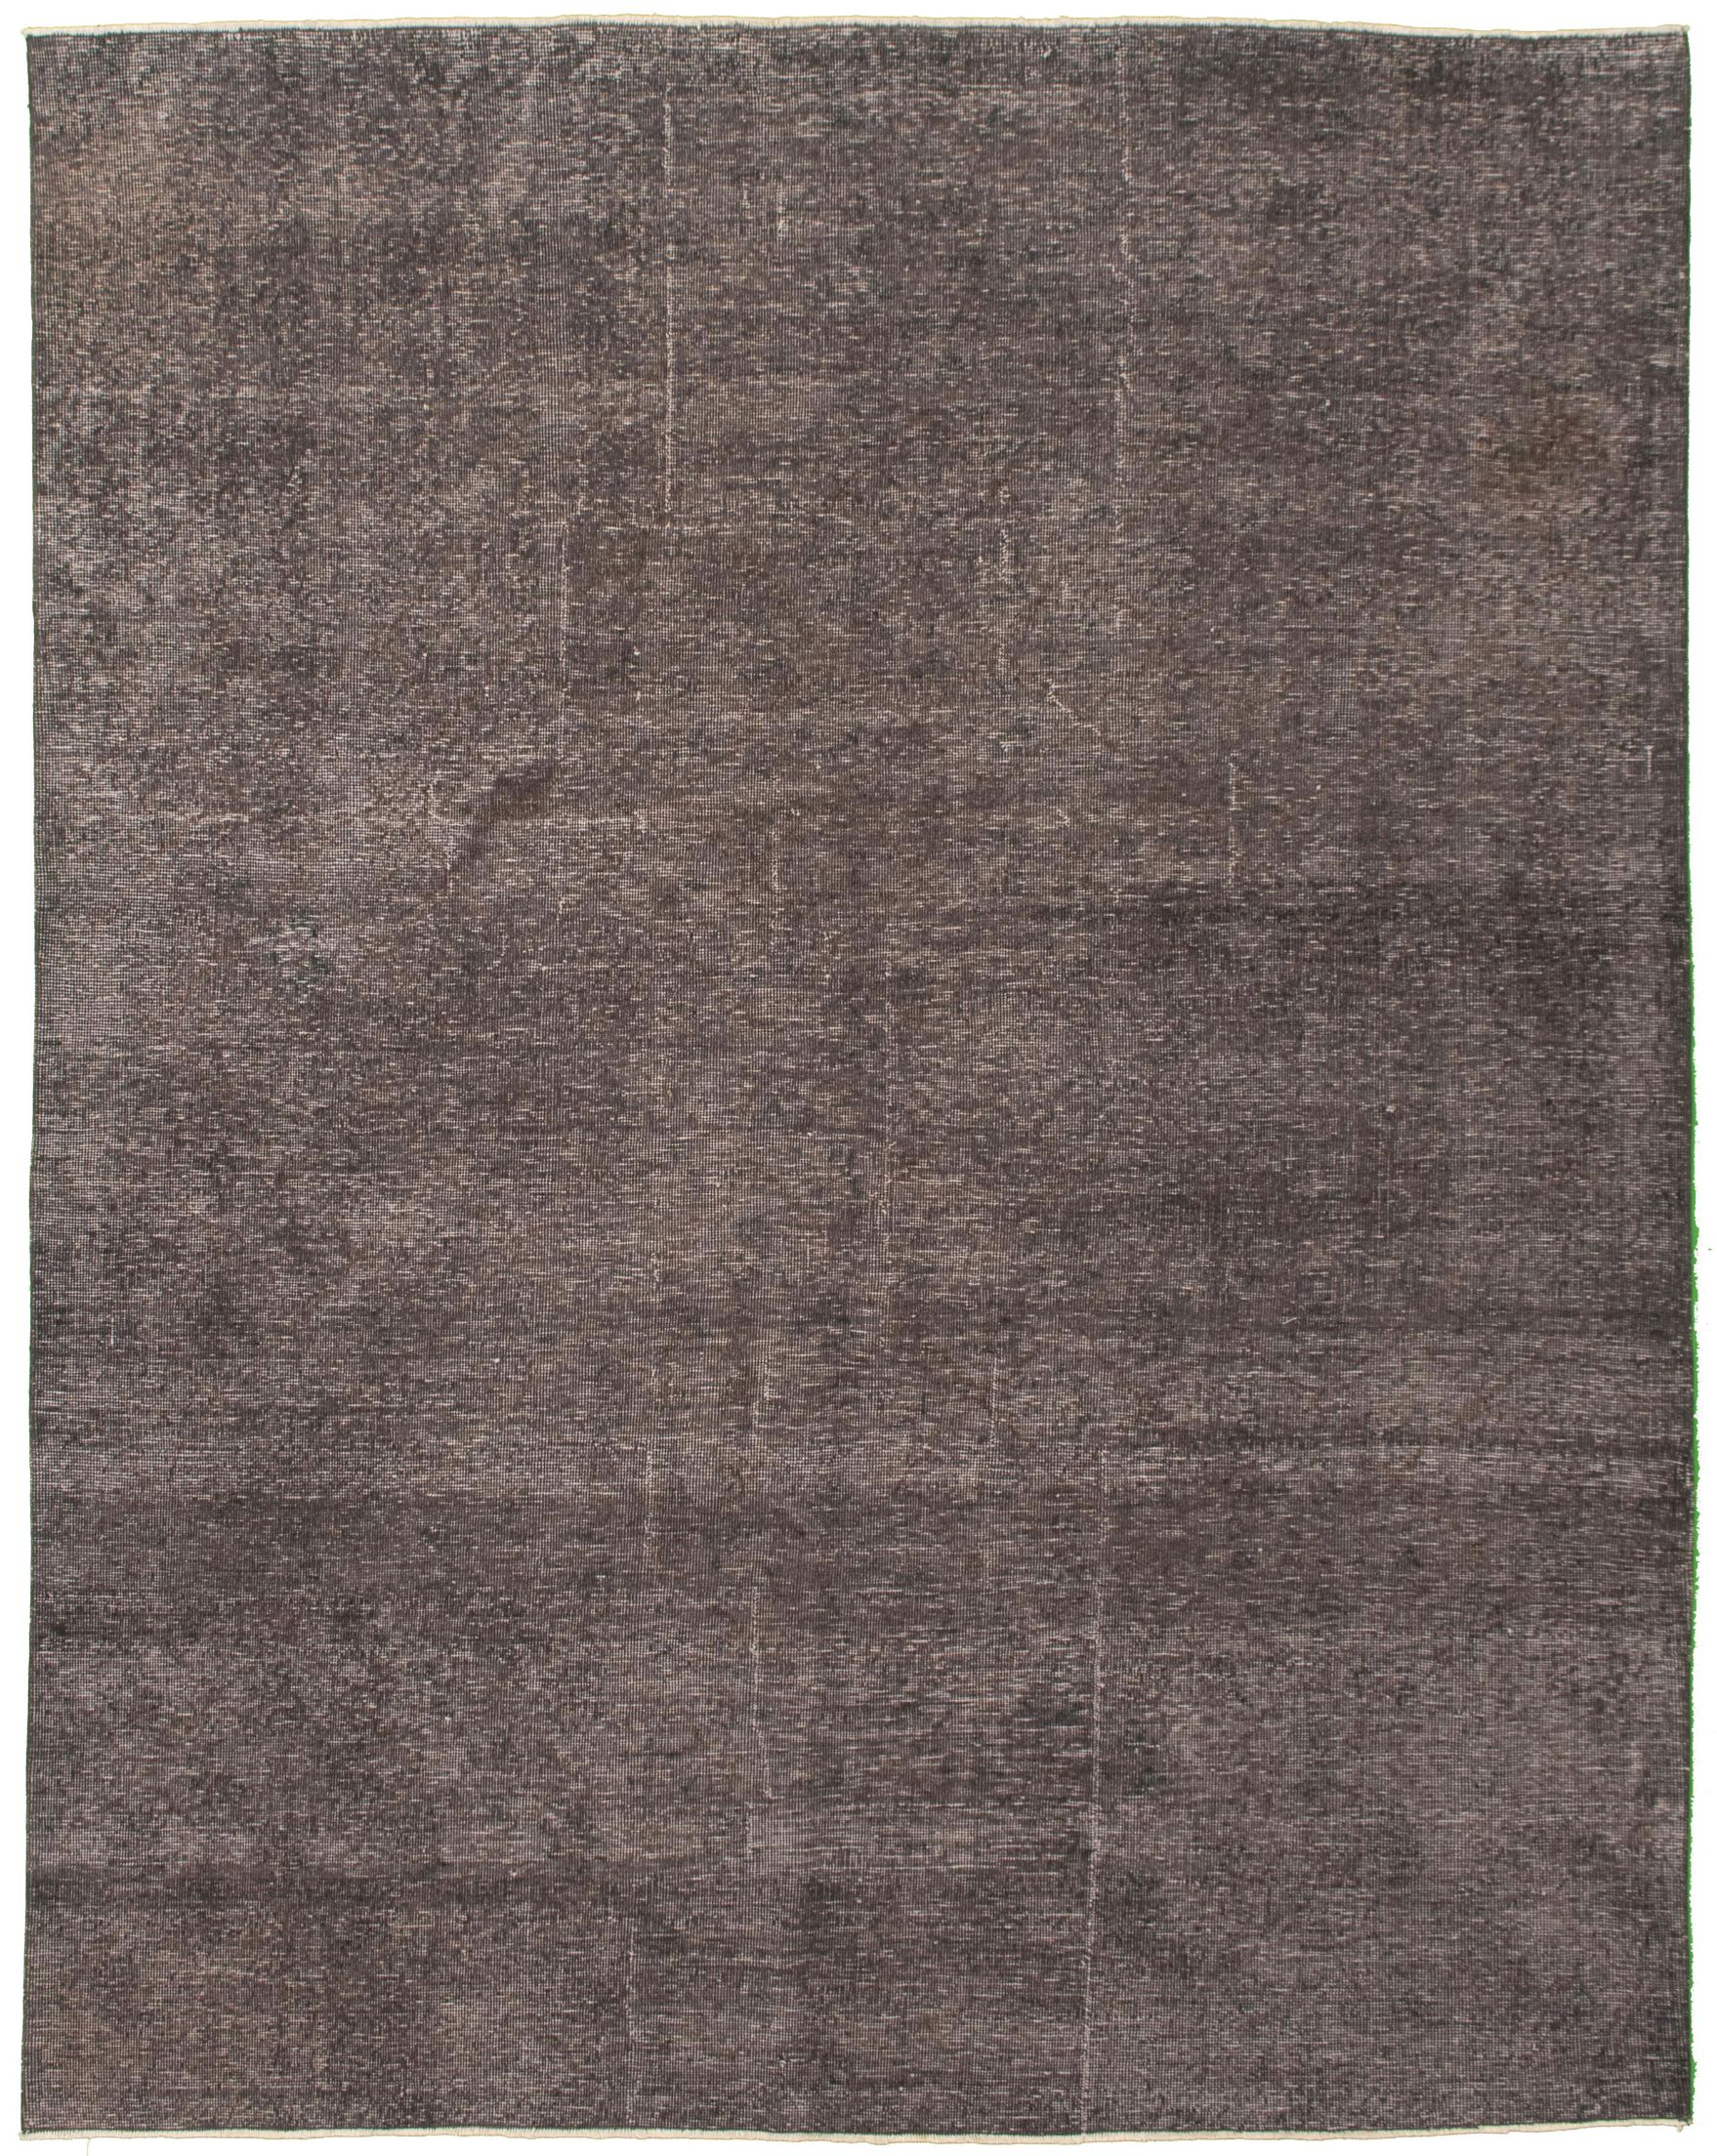 Hand-knotted Color Transition Dark Grey Wool Rug 7'2" x 8'11" Size: 7'2" x 8'11"  